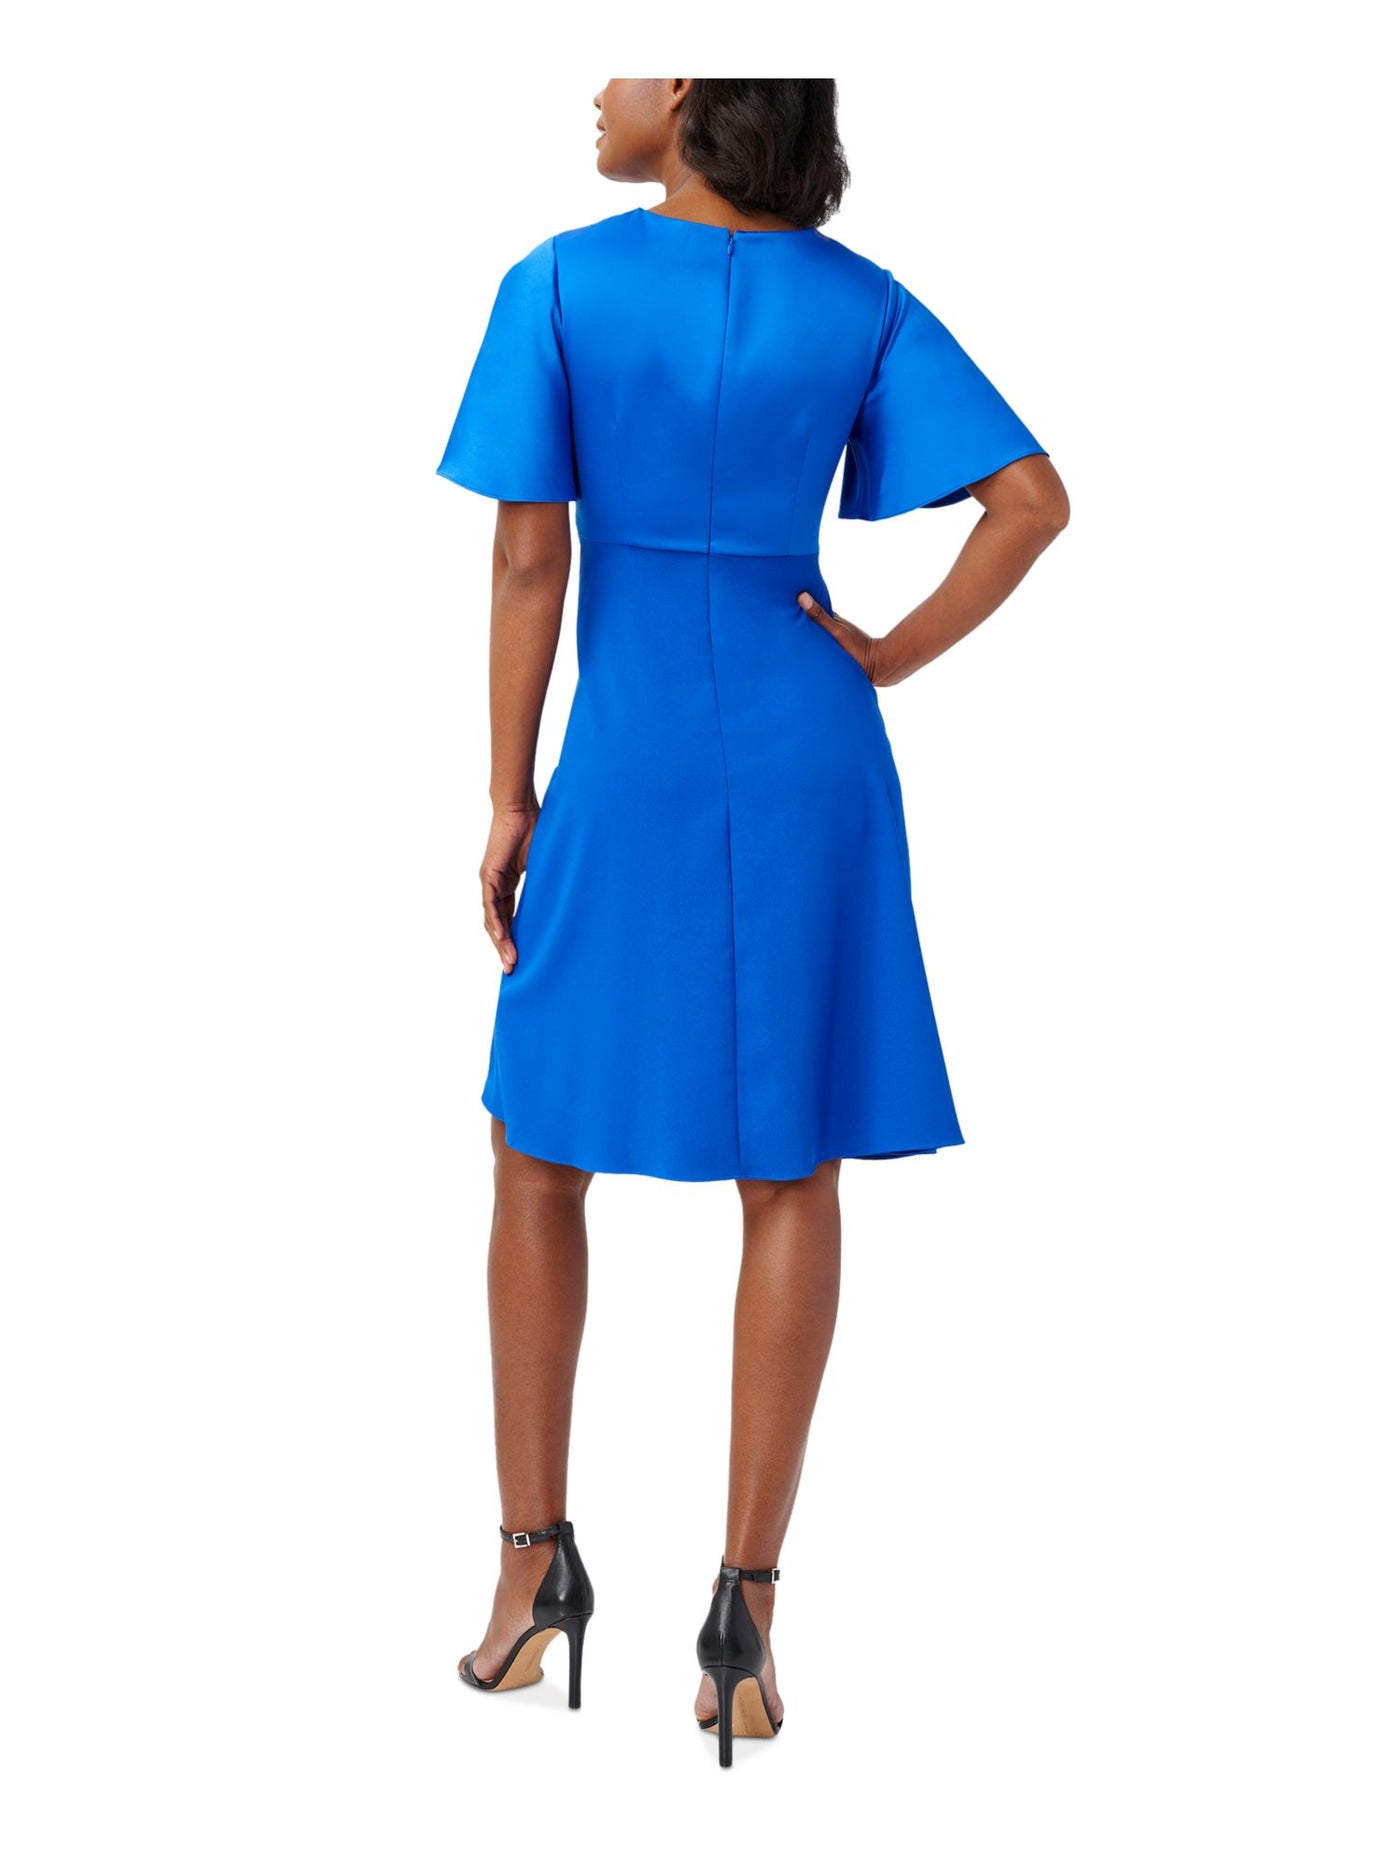 ADRIANNA PAPELL Womens Blue Pleated Zippered Flutter Sleeve Surplice Neckline Above The Knee Cocktail Fit + Flare Dress 4